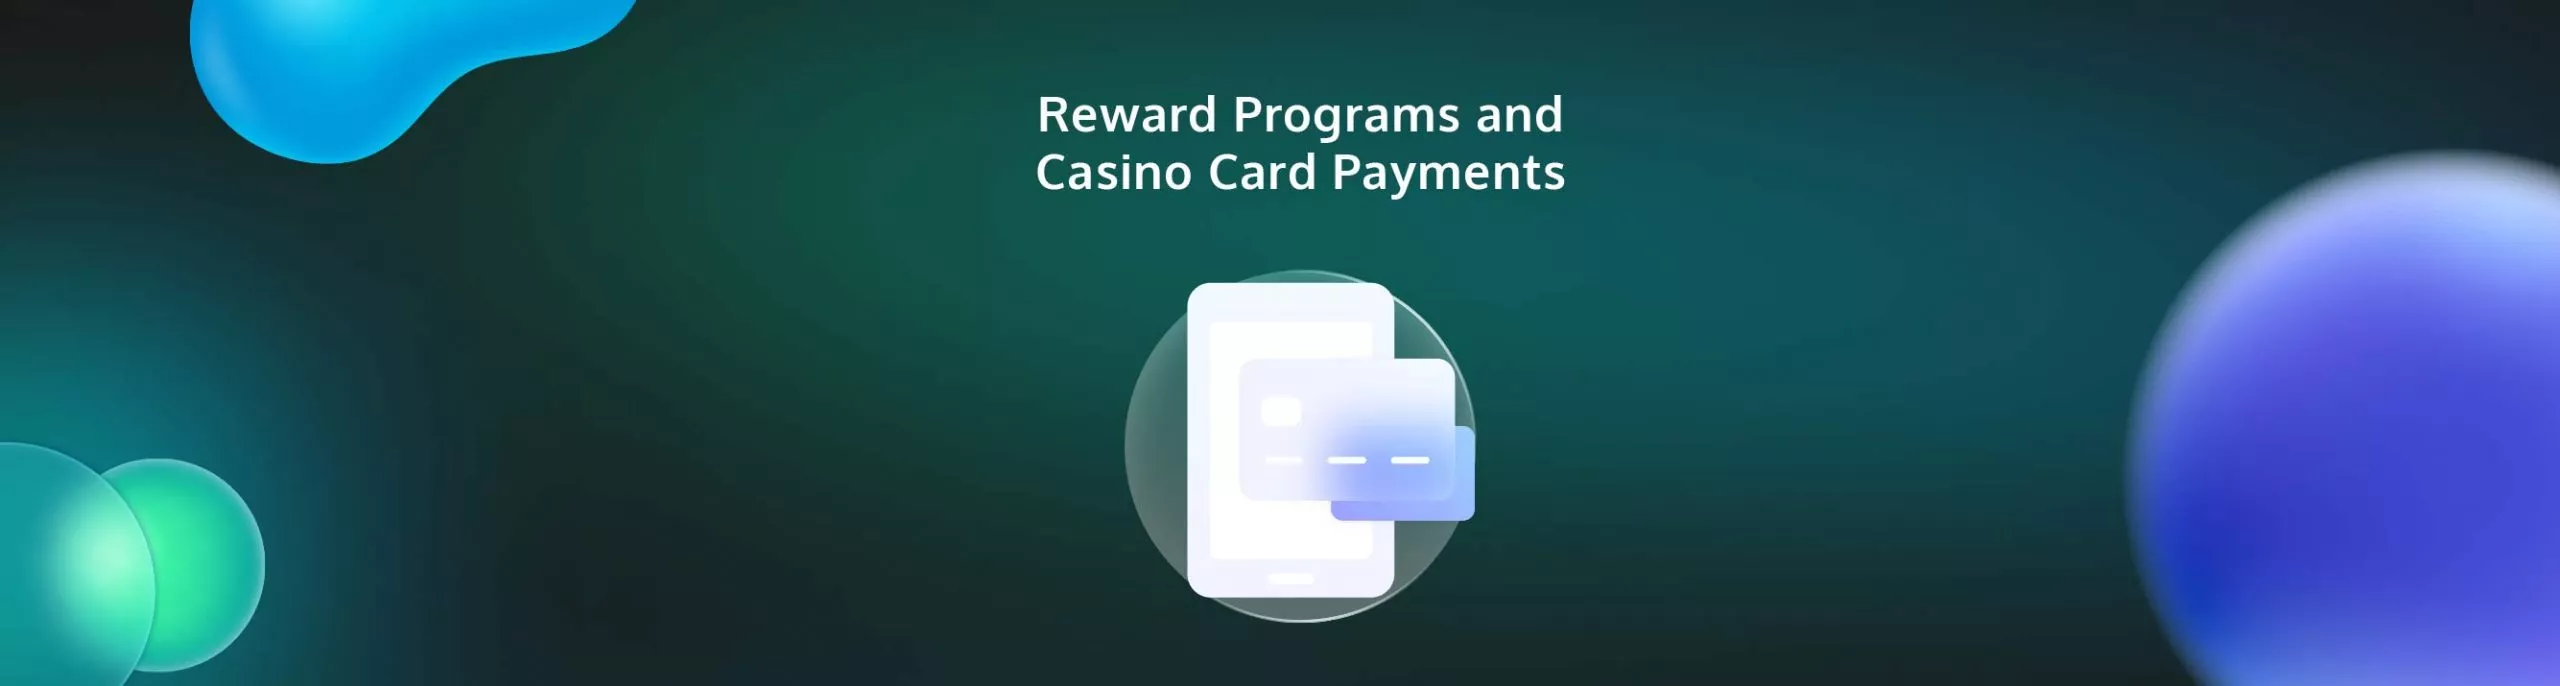 Reward Programs and Casino Card Payments